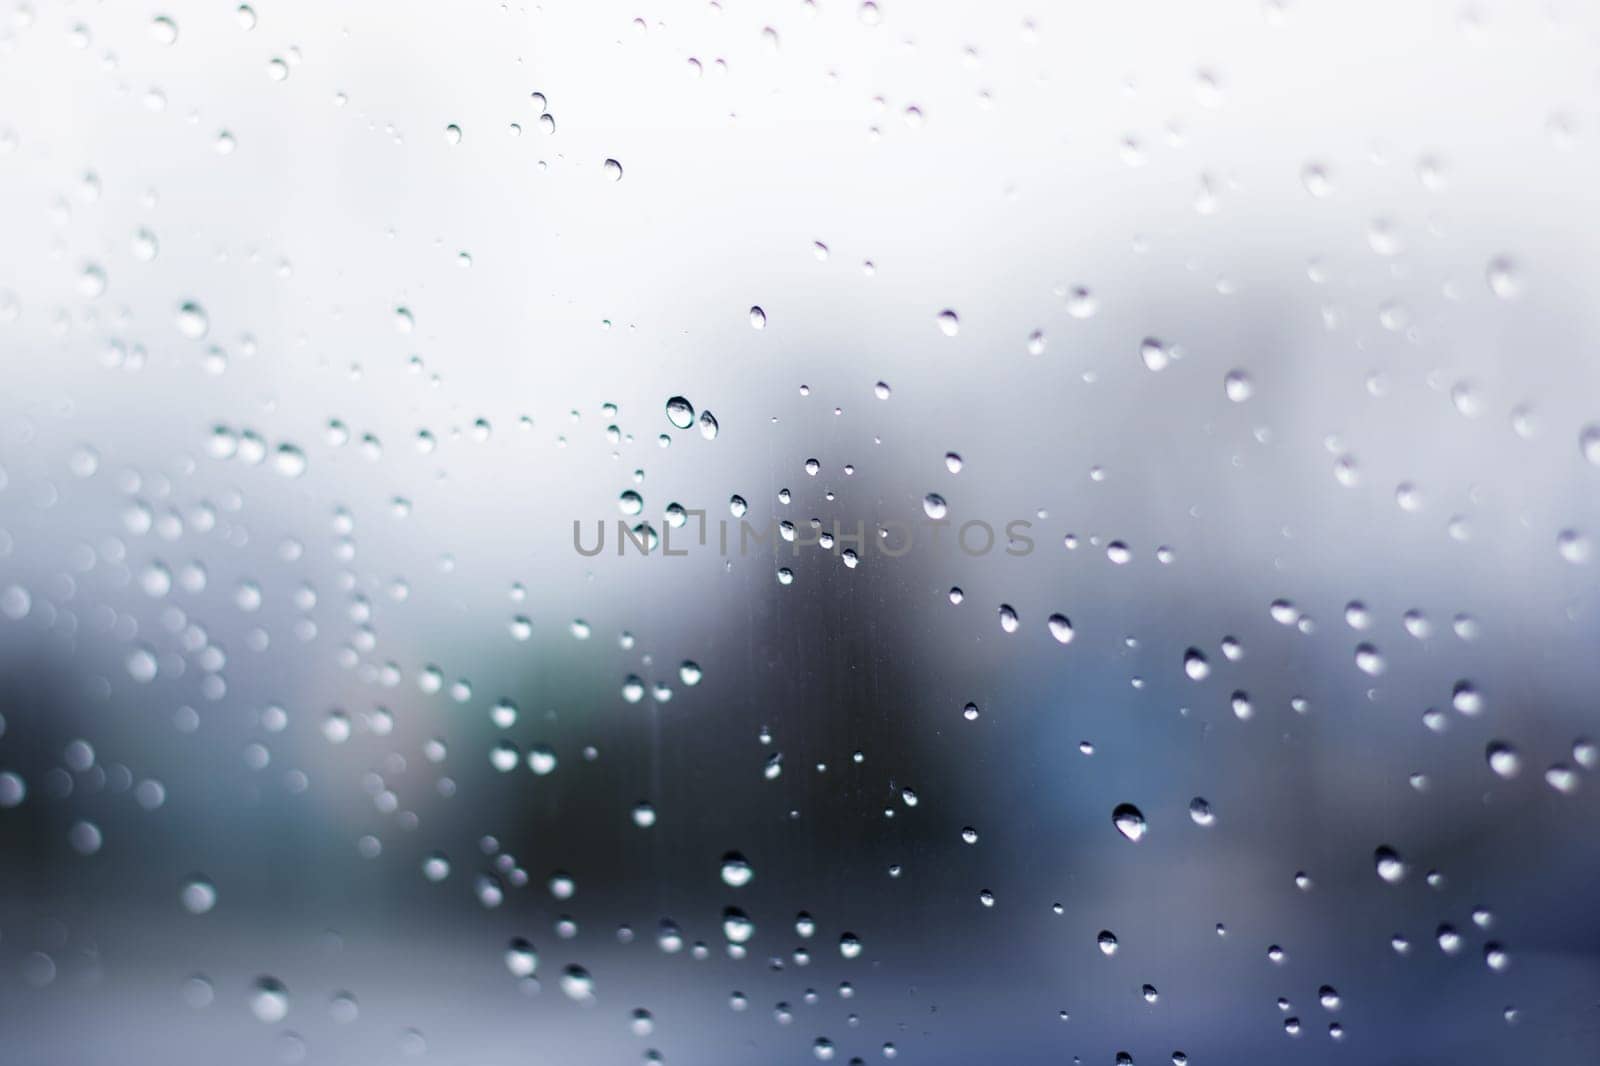 Water droplets cascade down a glass window, creating a blurry backdrop of tints and shades. The sky is painted in electric blue, capturing the beauty of liquid drizzle and moisture